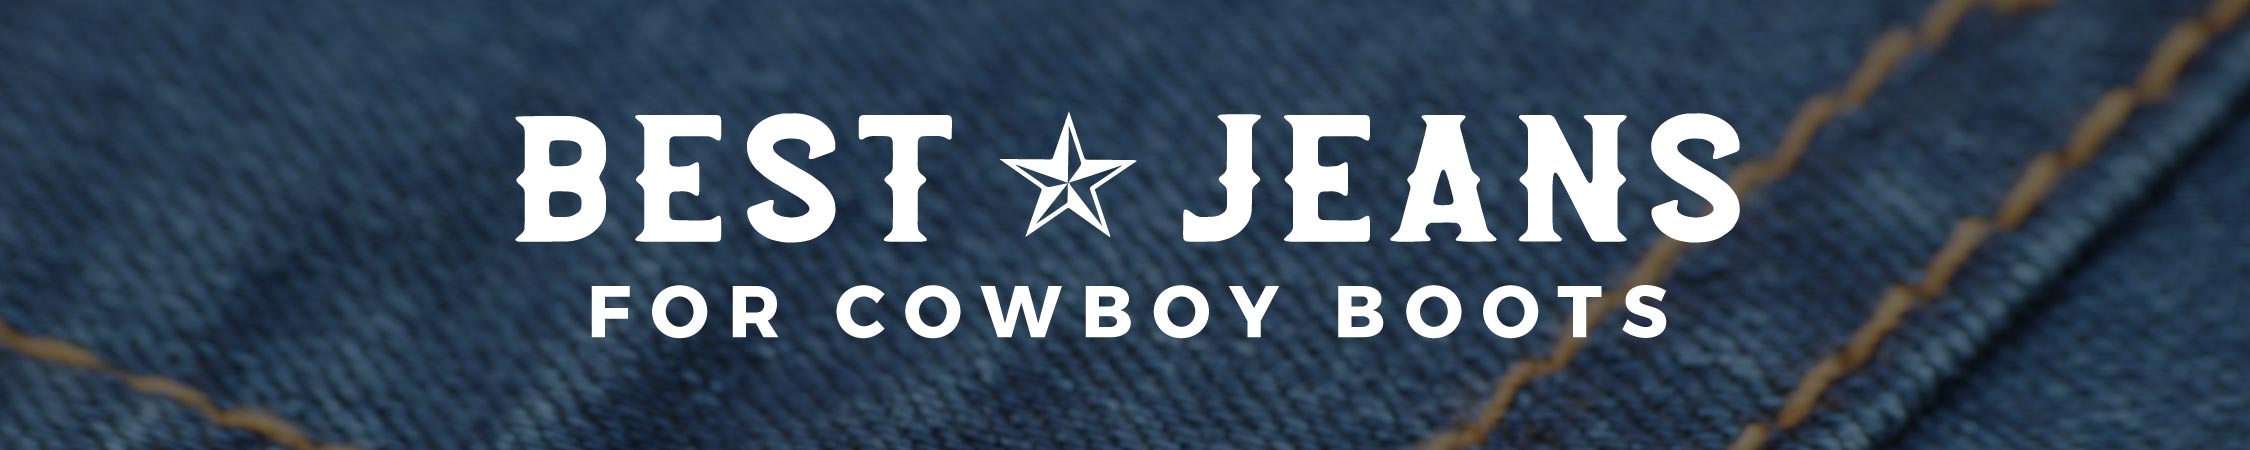 best jeans for cowboy boots banner